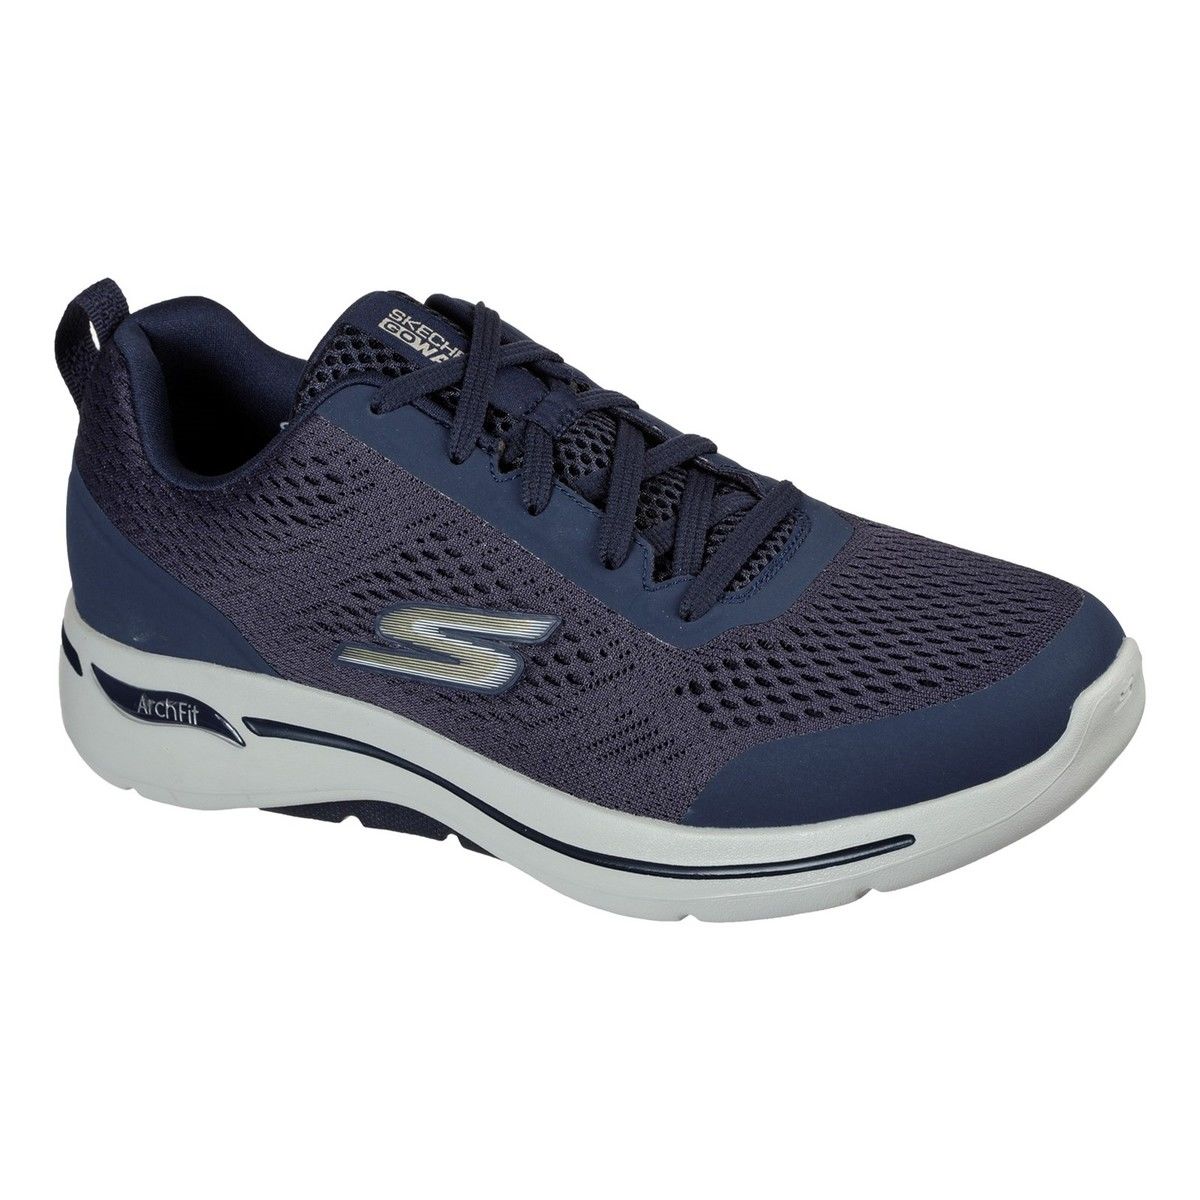 Skechers Go Walk Arch Fit NVGD Navy Gold Mens trainers